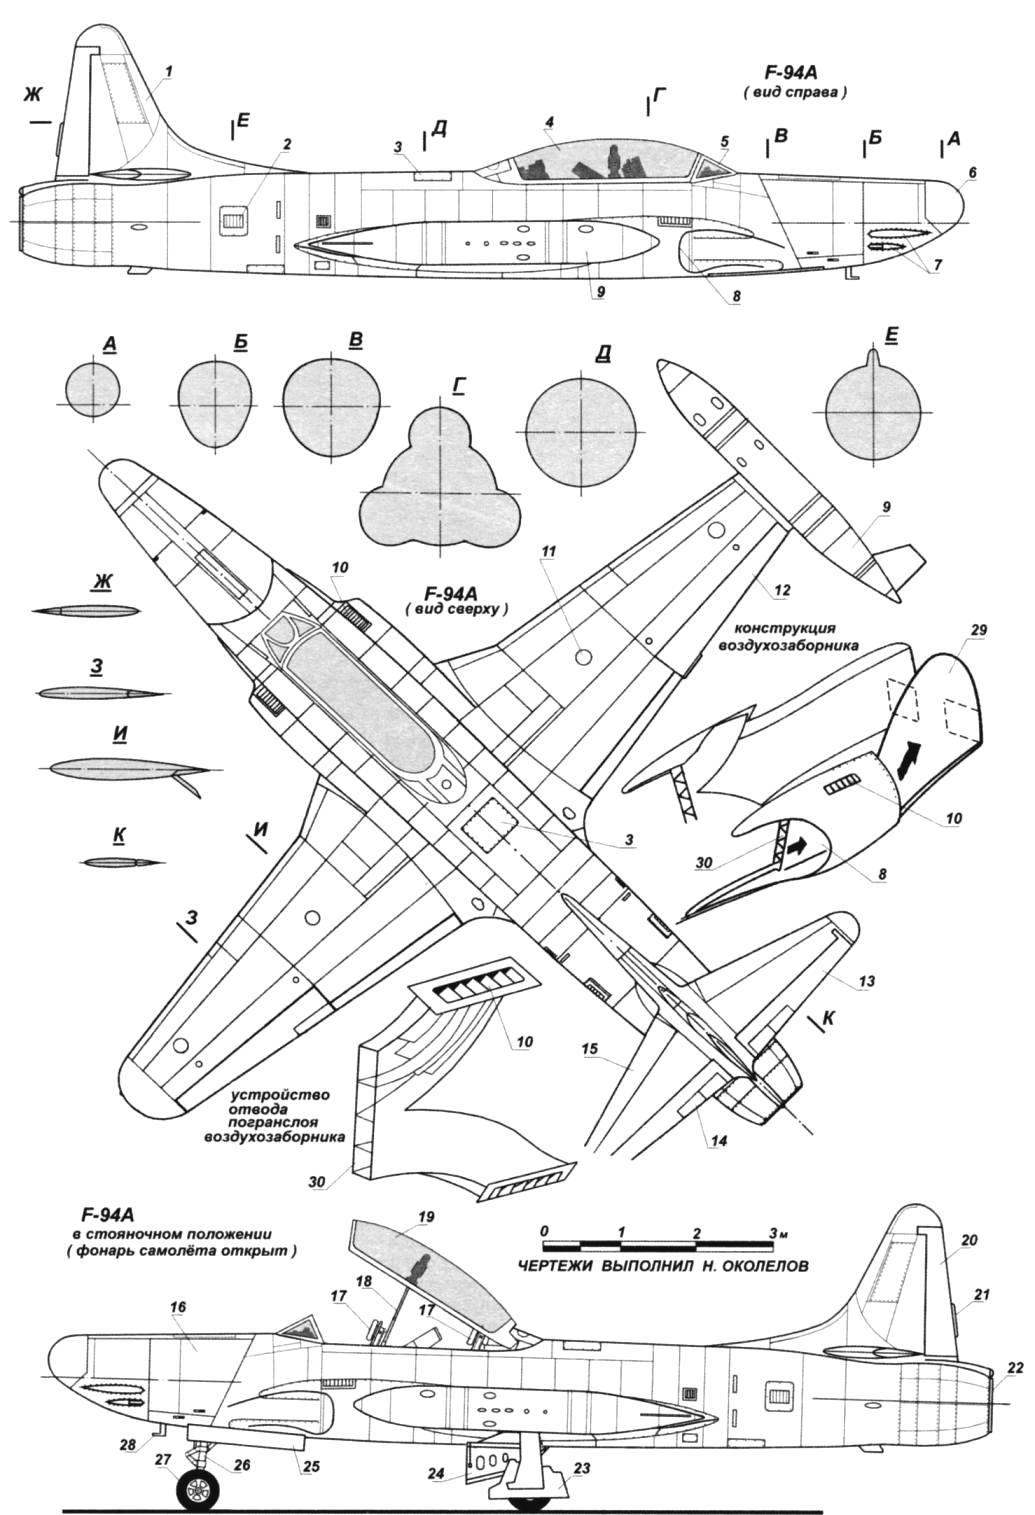 Refer to drawing F-94